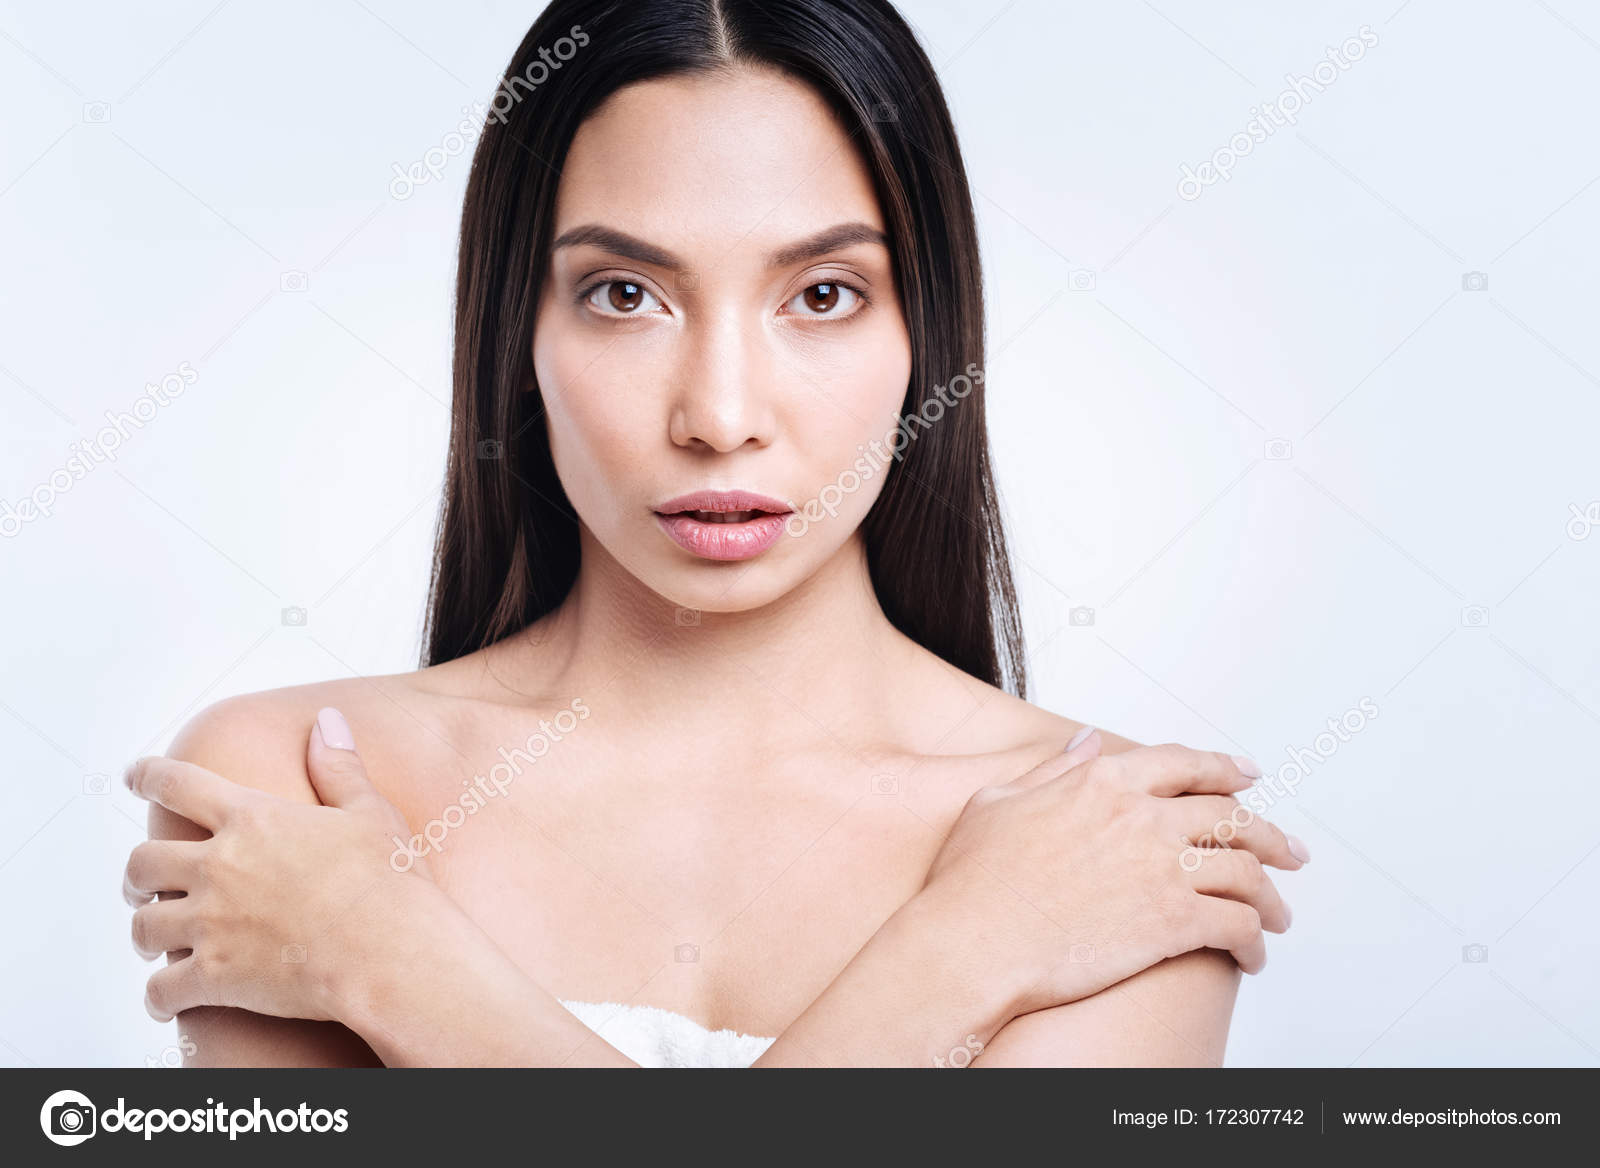 Dancer Poses with Hands Crossed Stock Image - Image of freestyle, male:  29374339